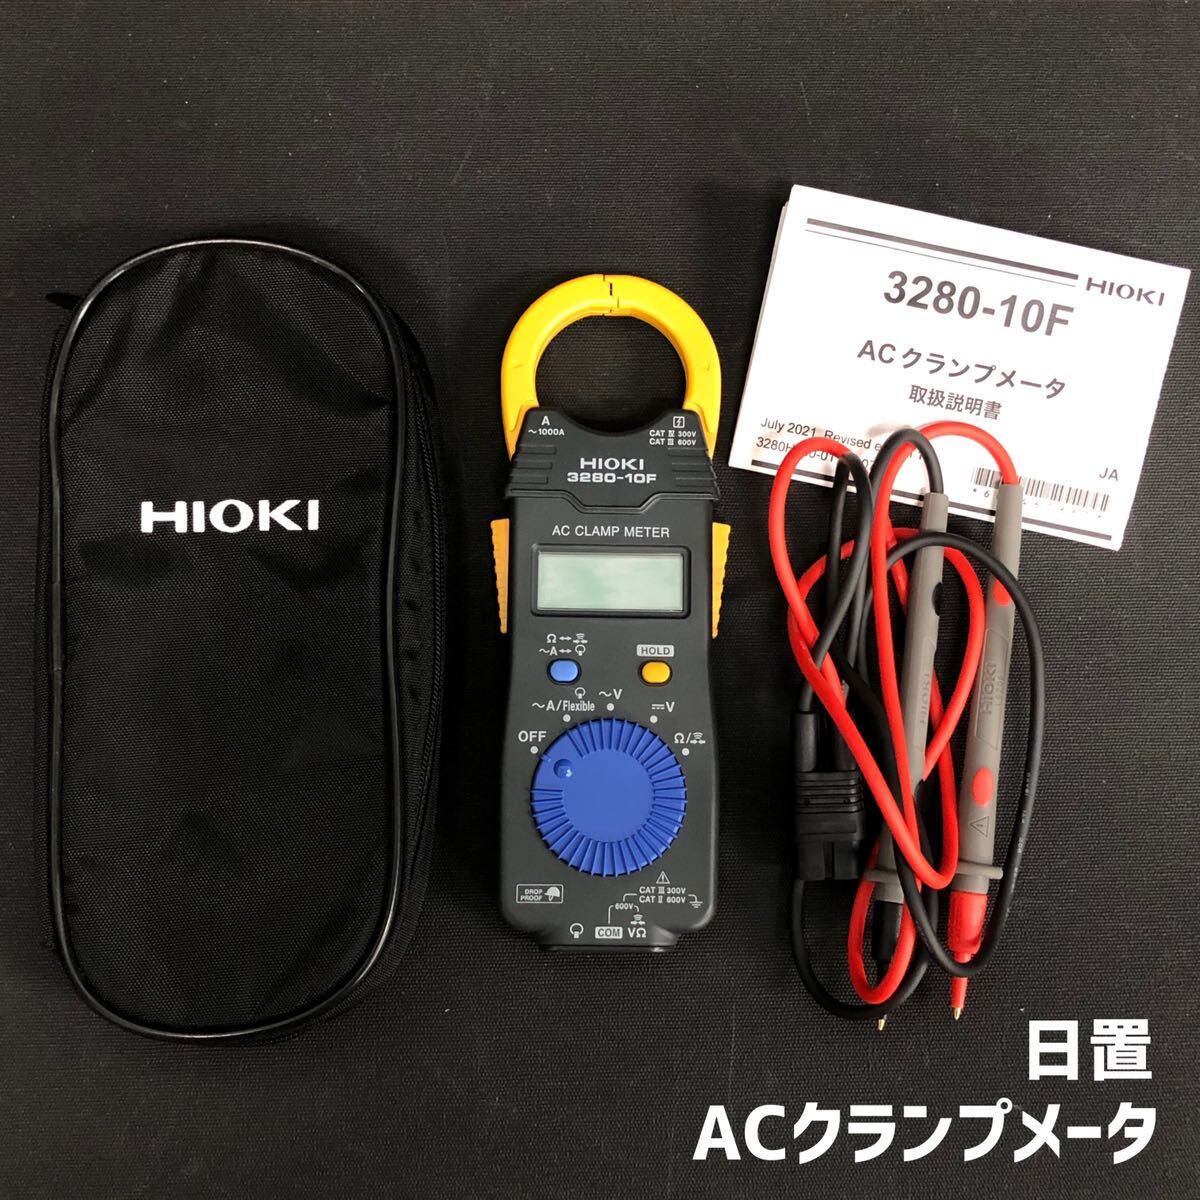 H# HIOKI day .AC clamp meter 3280-10F electric current series measuring instrument alternating current electric current measurement voltage measurement resistance measurement cable soft case attaching electrification verification settled beautiful goods 